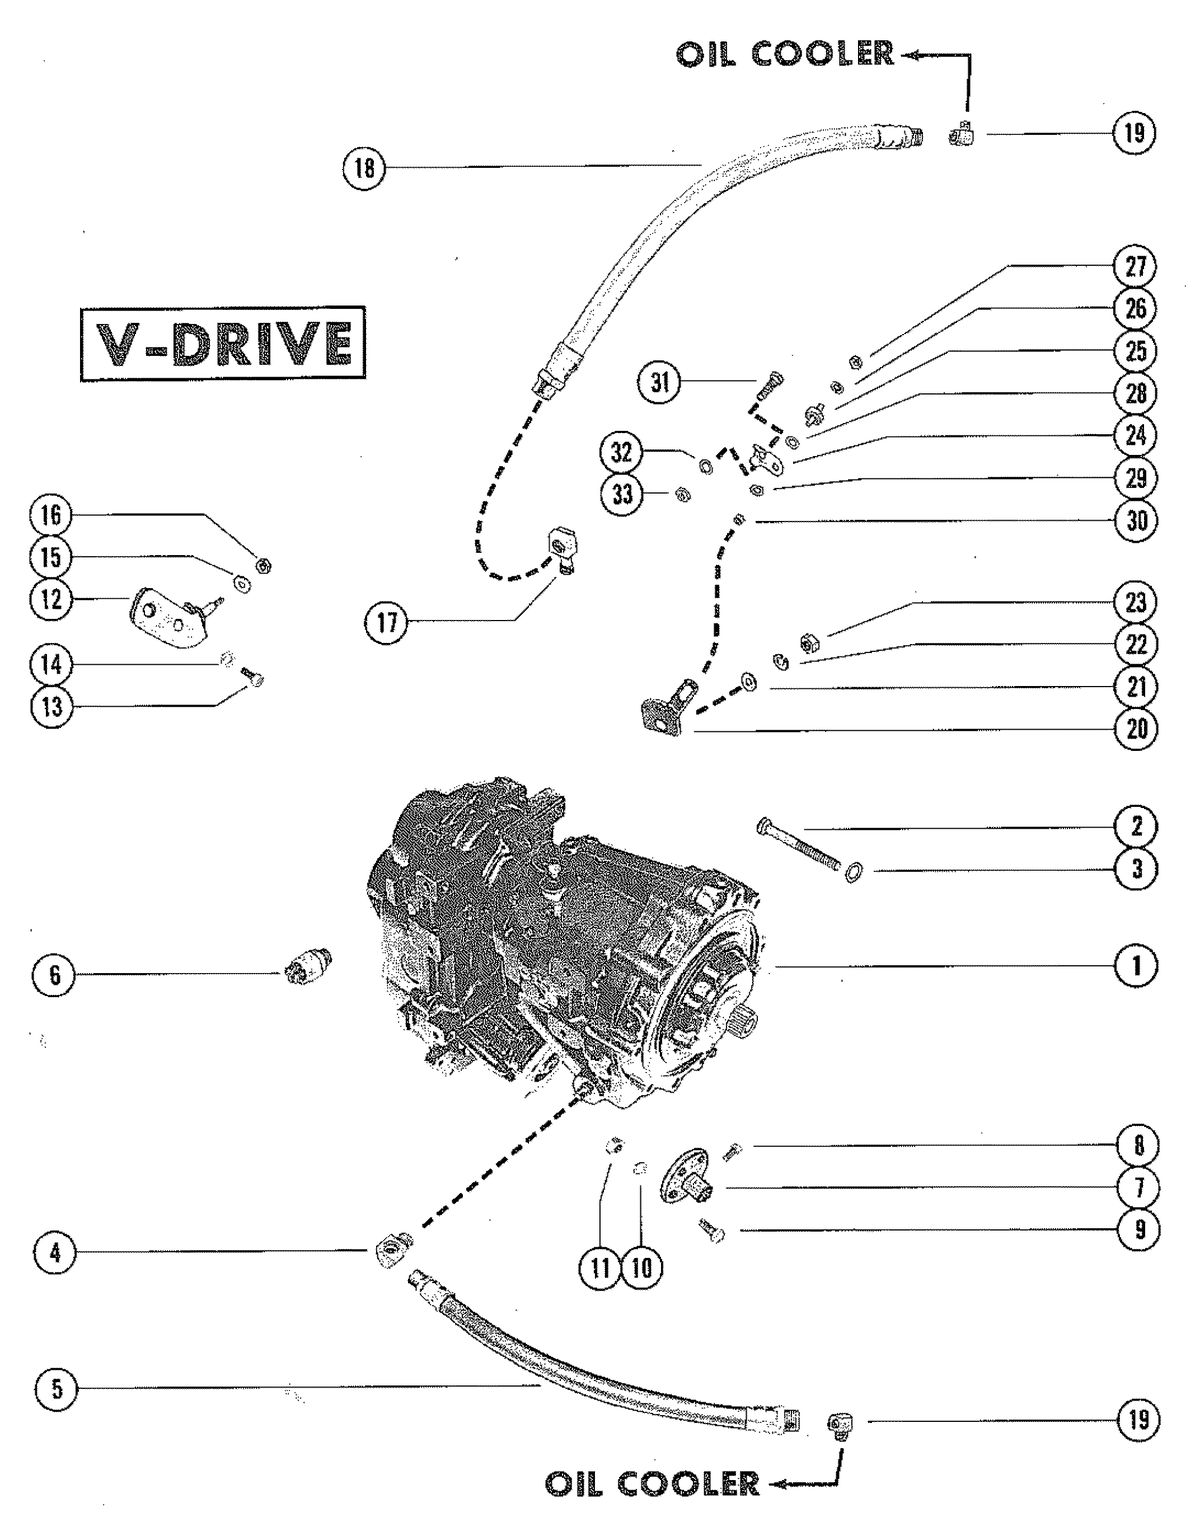 MERCRUISER 255 ENGINE TRANSMISSION AND RELATED PARTS (V-DRIVE)